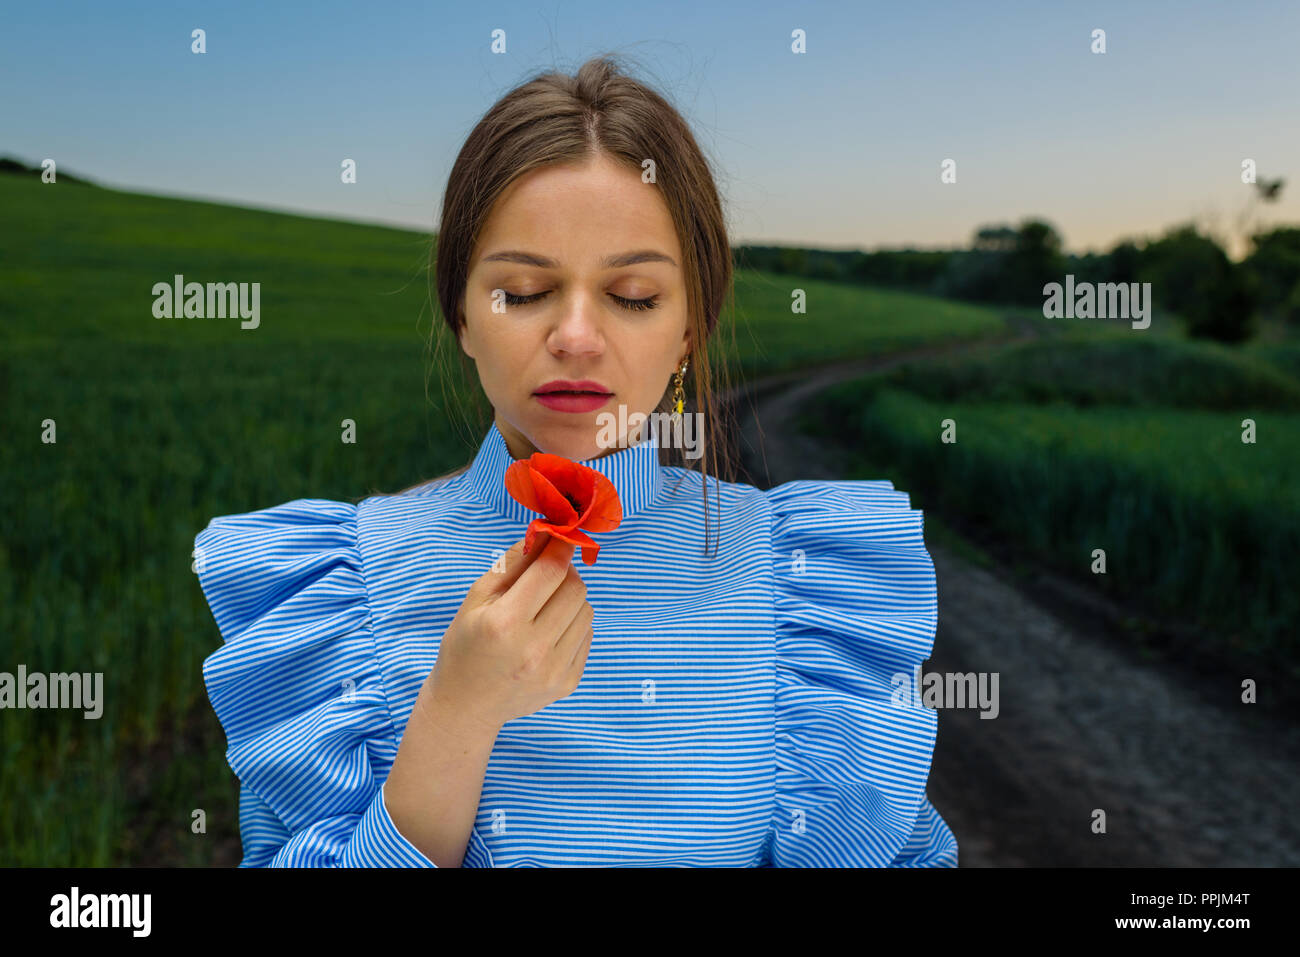 Young woman in blue and white striped dress is holding a red poppy flower in her hand with her eyes closed while standing on the country road near fie Stock Photo